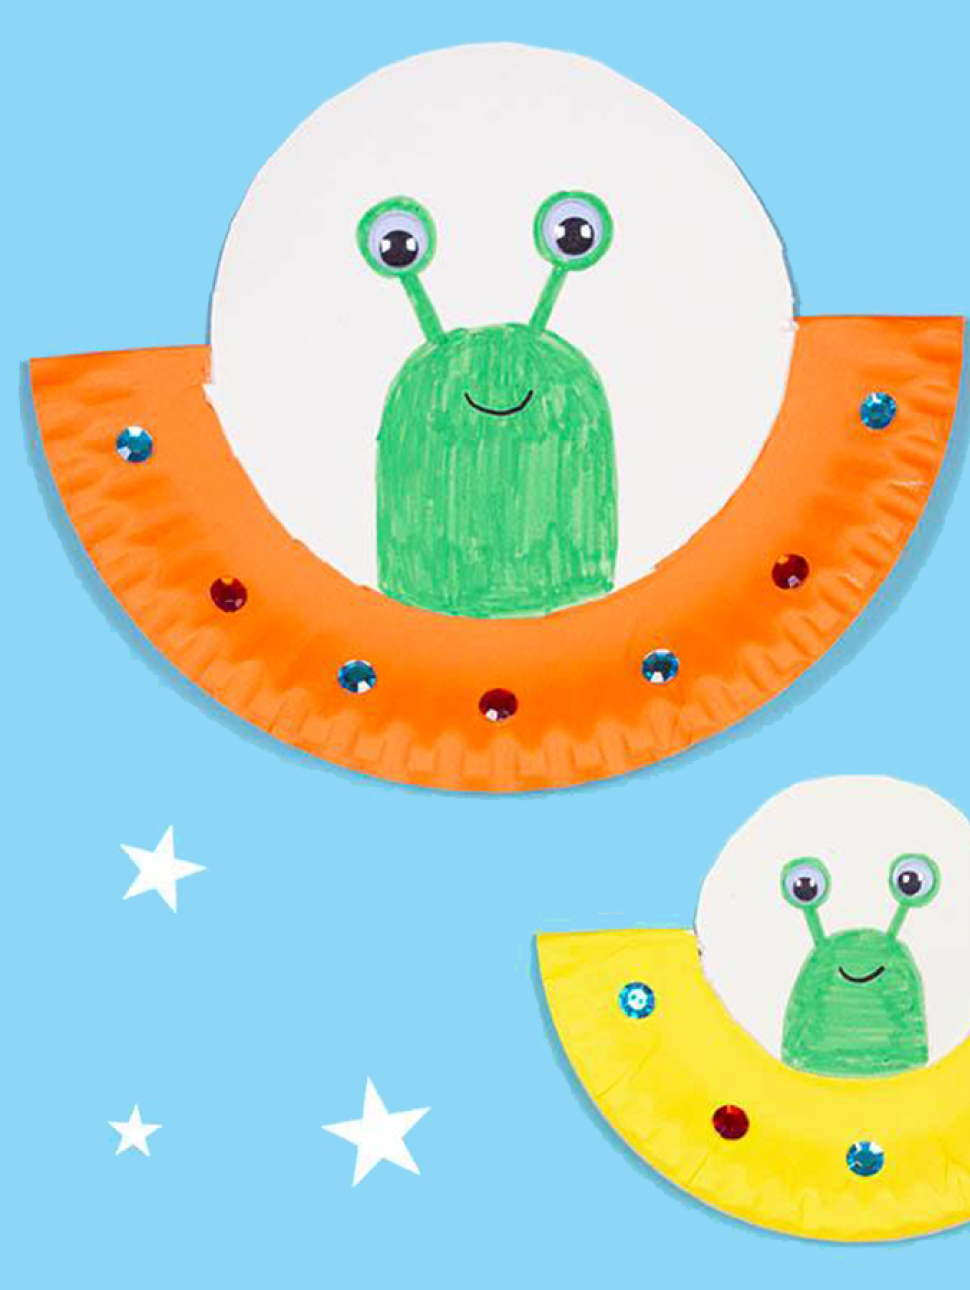 Three paper and drawn green aliens are in different coloured round spaceships in a blue and starry background